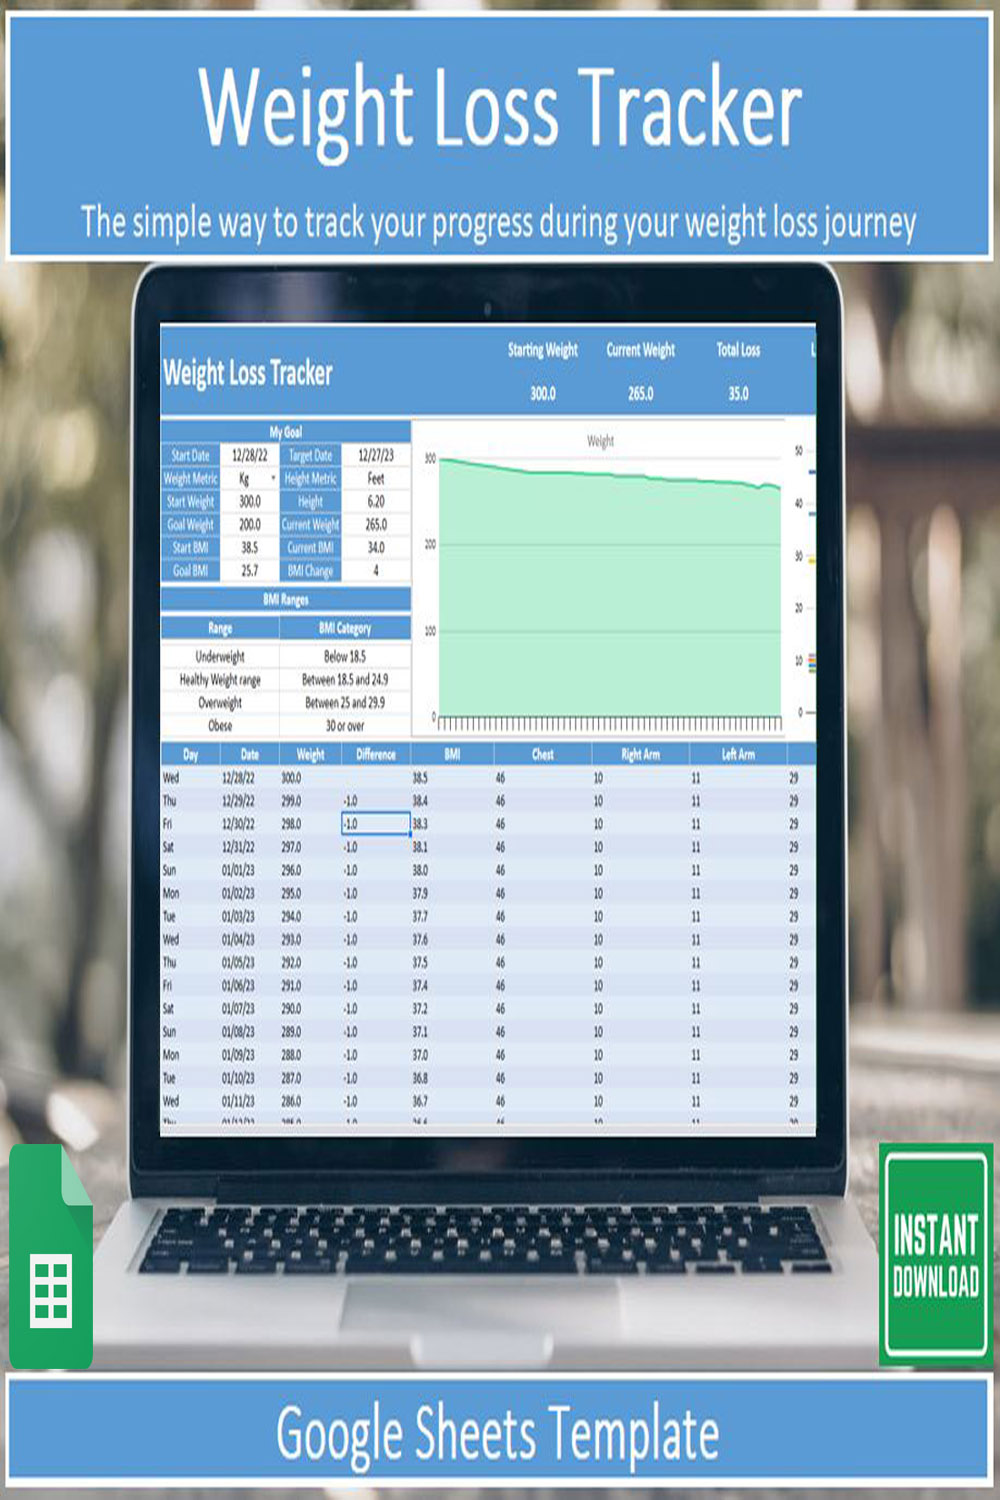 Editable Weight Loss Tracker Template for Google Sheets pinterest image.